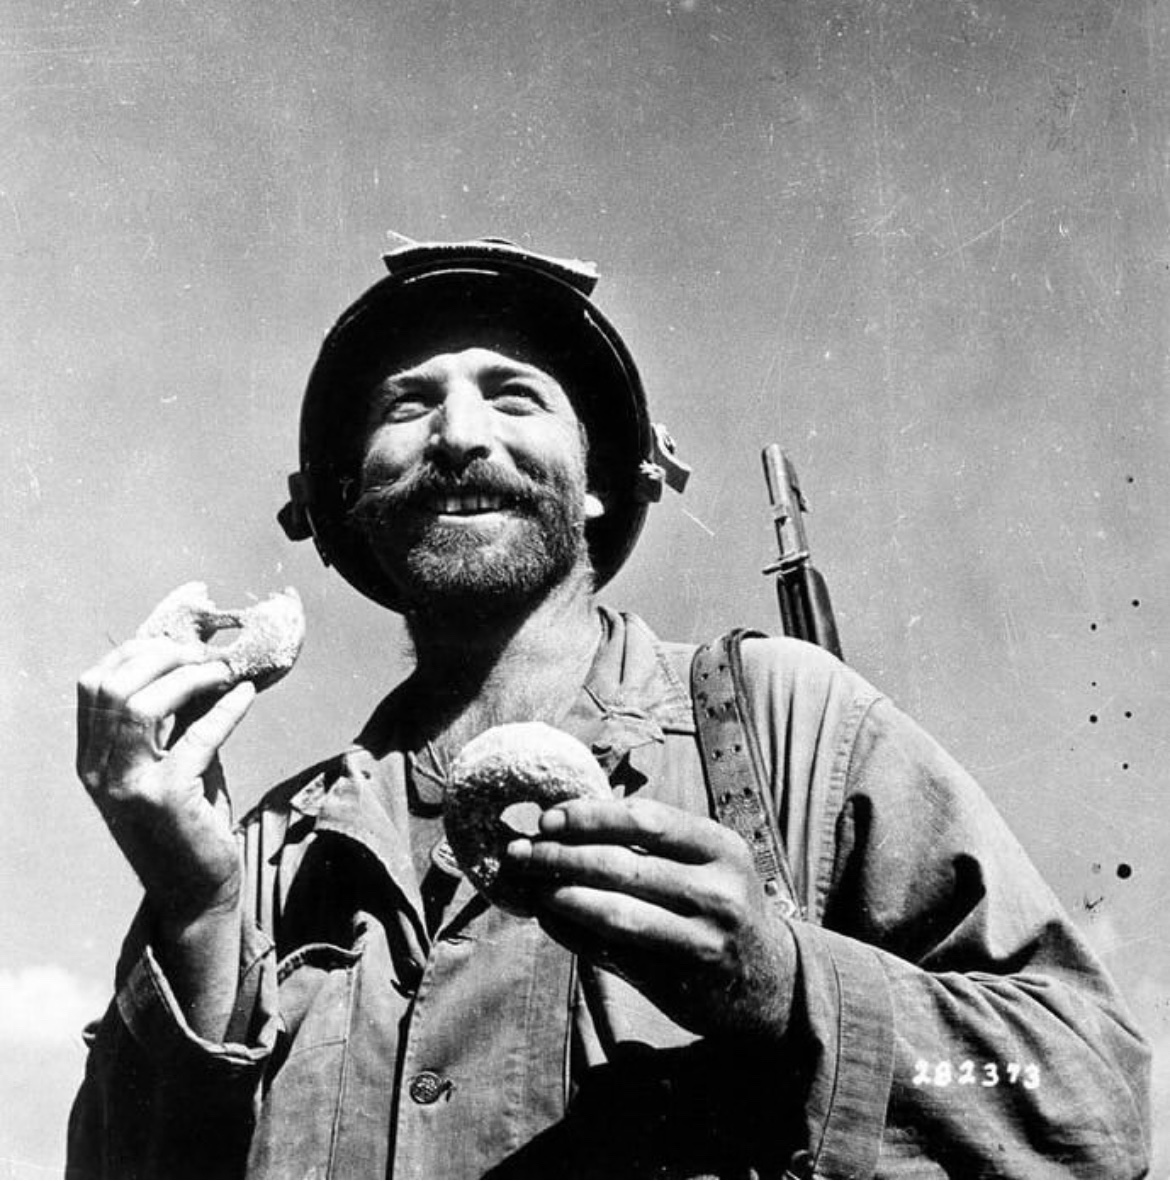 During the fighting on Okinawa, a bearded GI enjoys a doughnut in 1945. 🪖